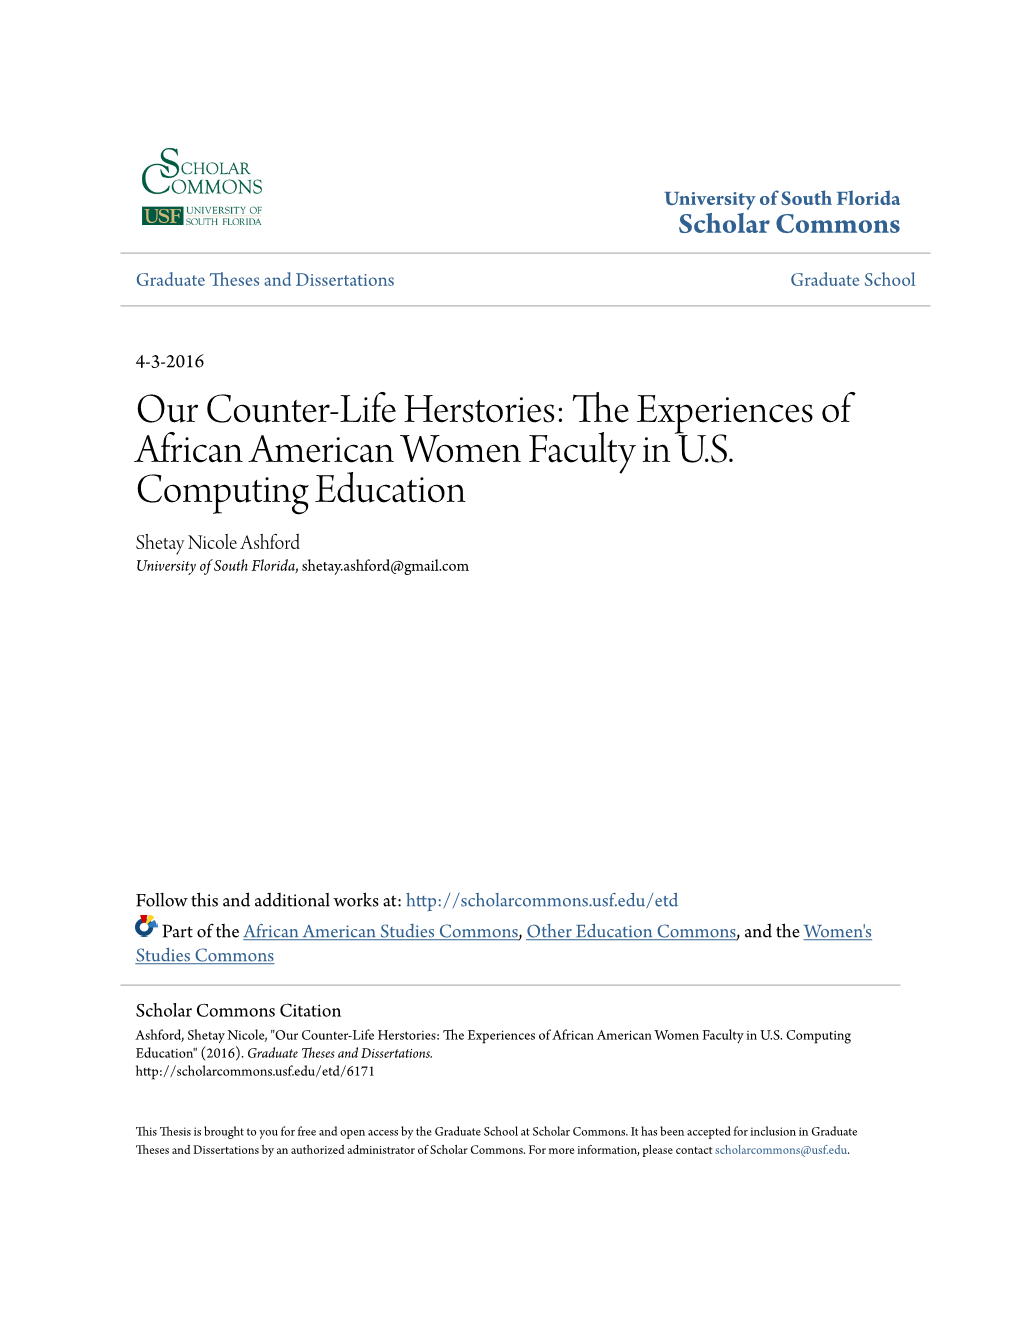 Our Counter-Life Herstories: the Experiences of African American Women Faculty in U.S